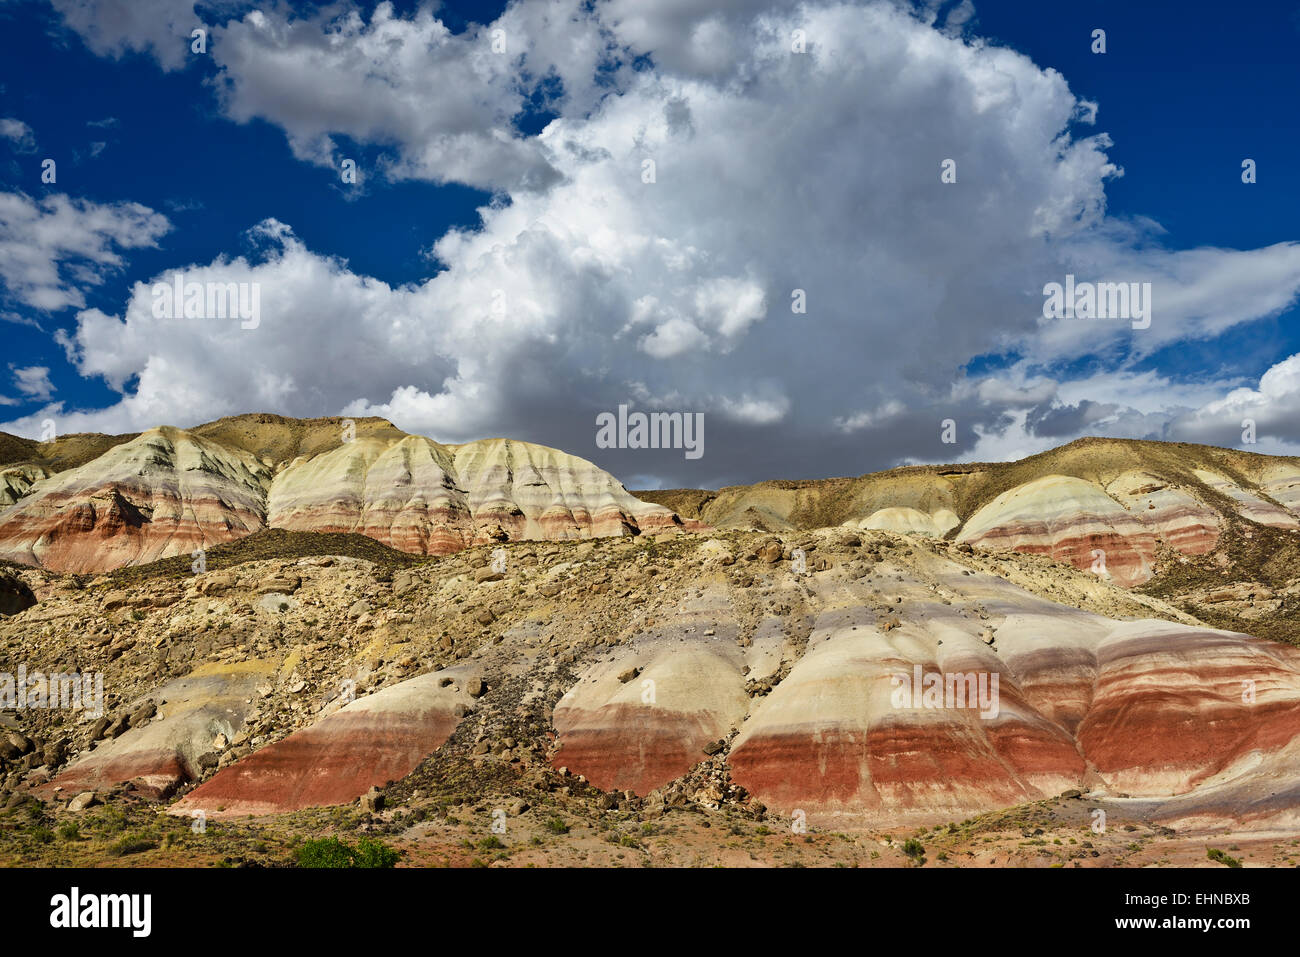 Hills in revealing sediment layers in Capital Reef National Park, Utah, United States. Stock Photo